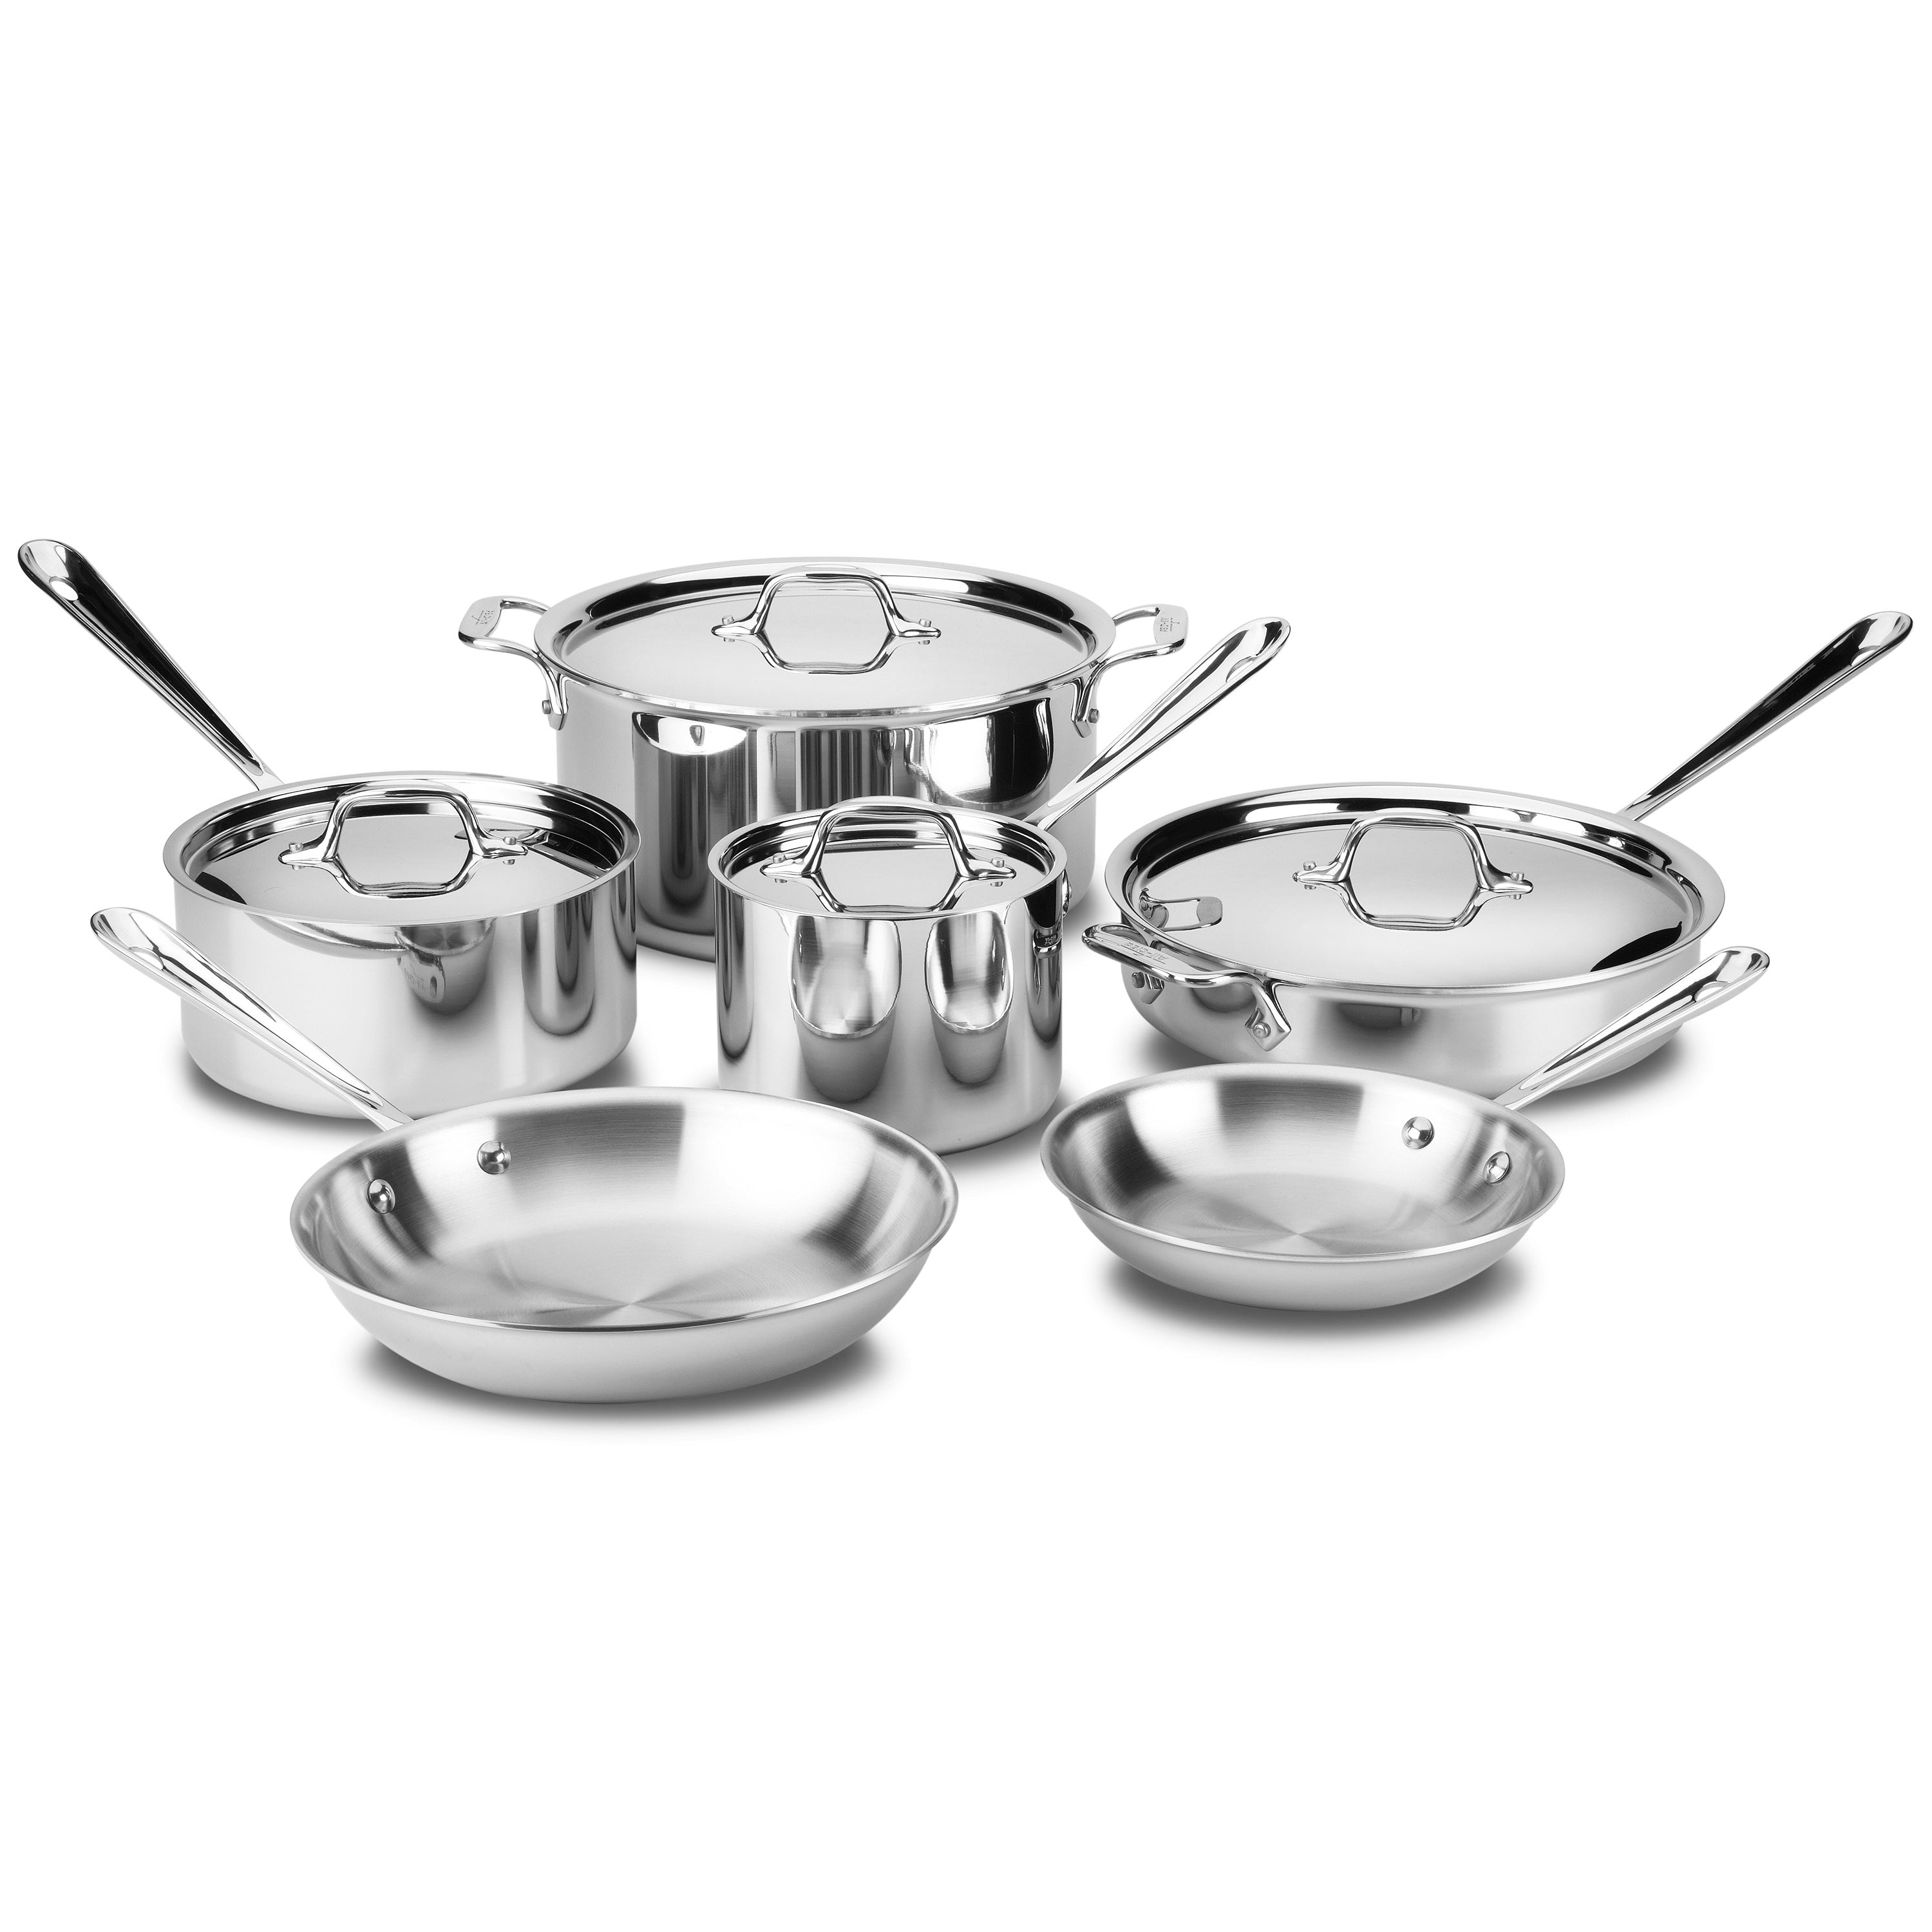 D3 Stainless 3-ply Bonded Cookware Set, 10 piece Set